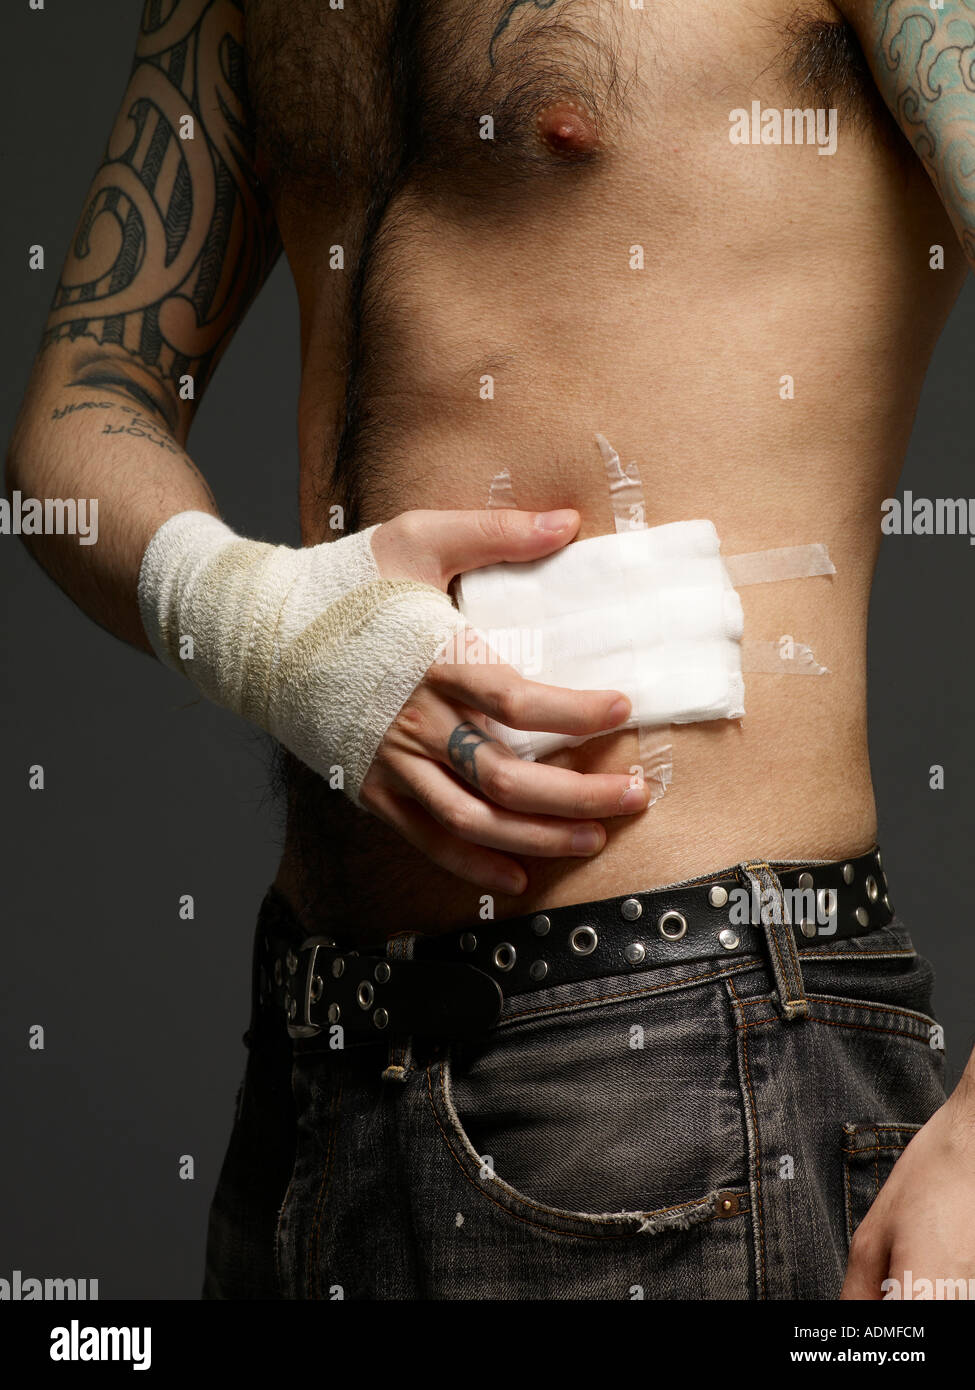 Man with bandages on his hand and torso Stock Photo - Alamy